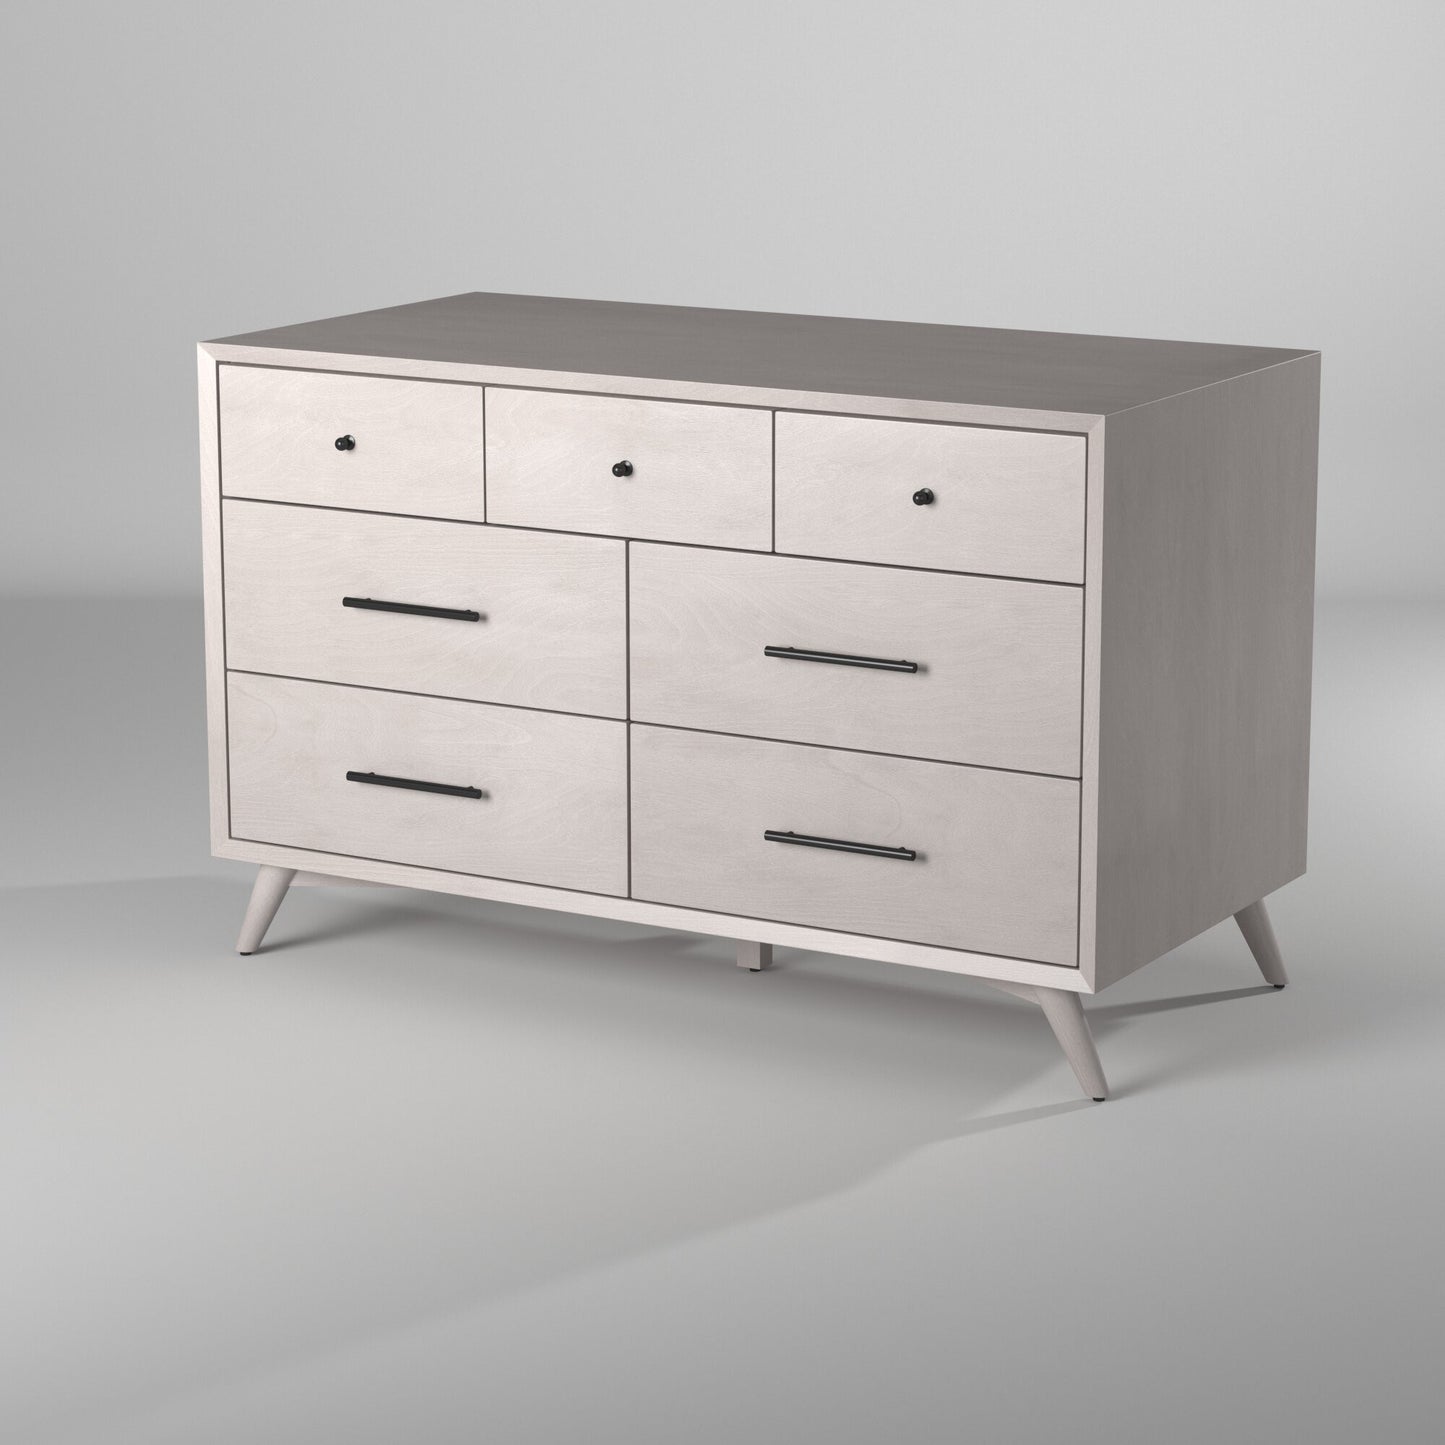 59" Gray Solid Wood Seven Drawer Double Dresser